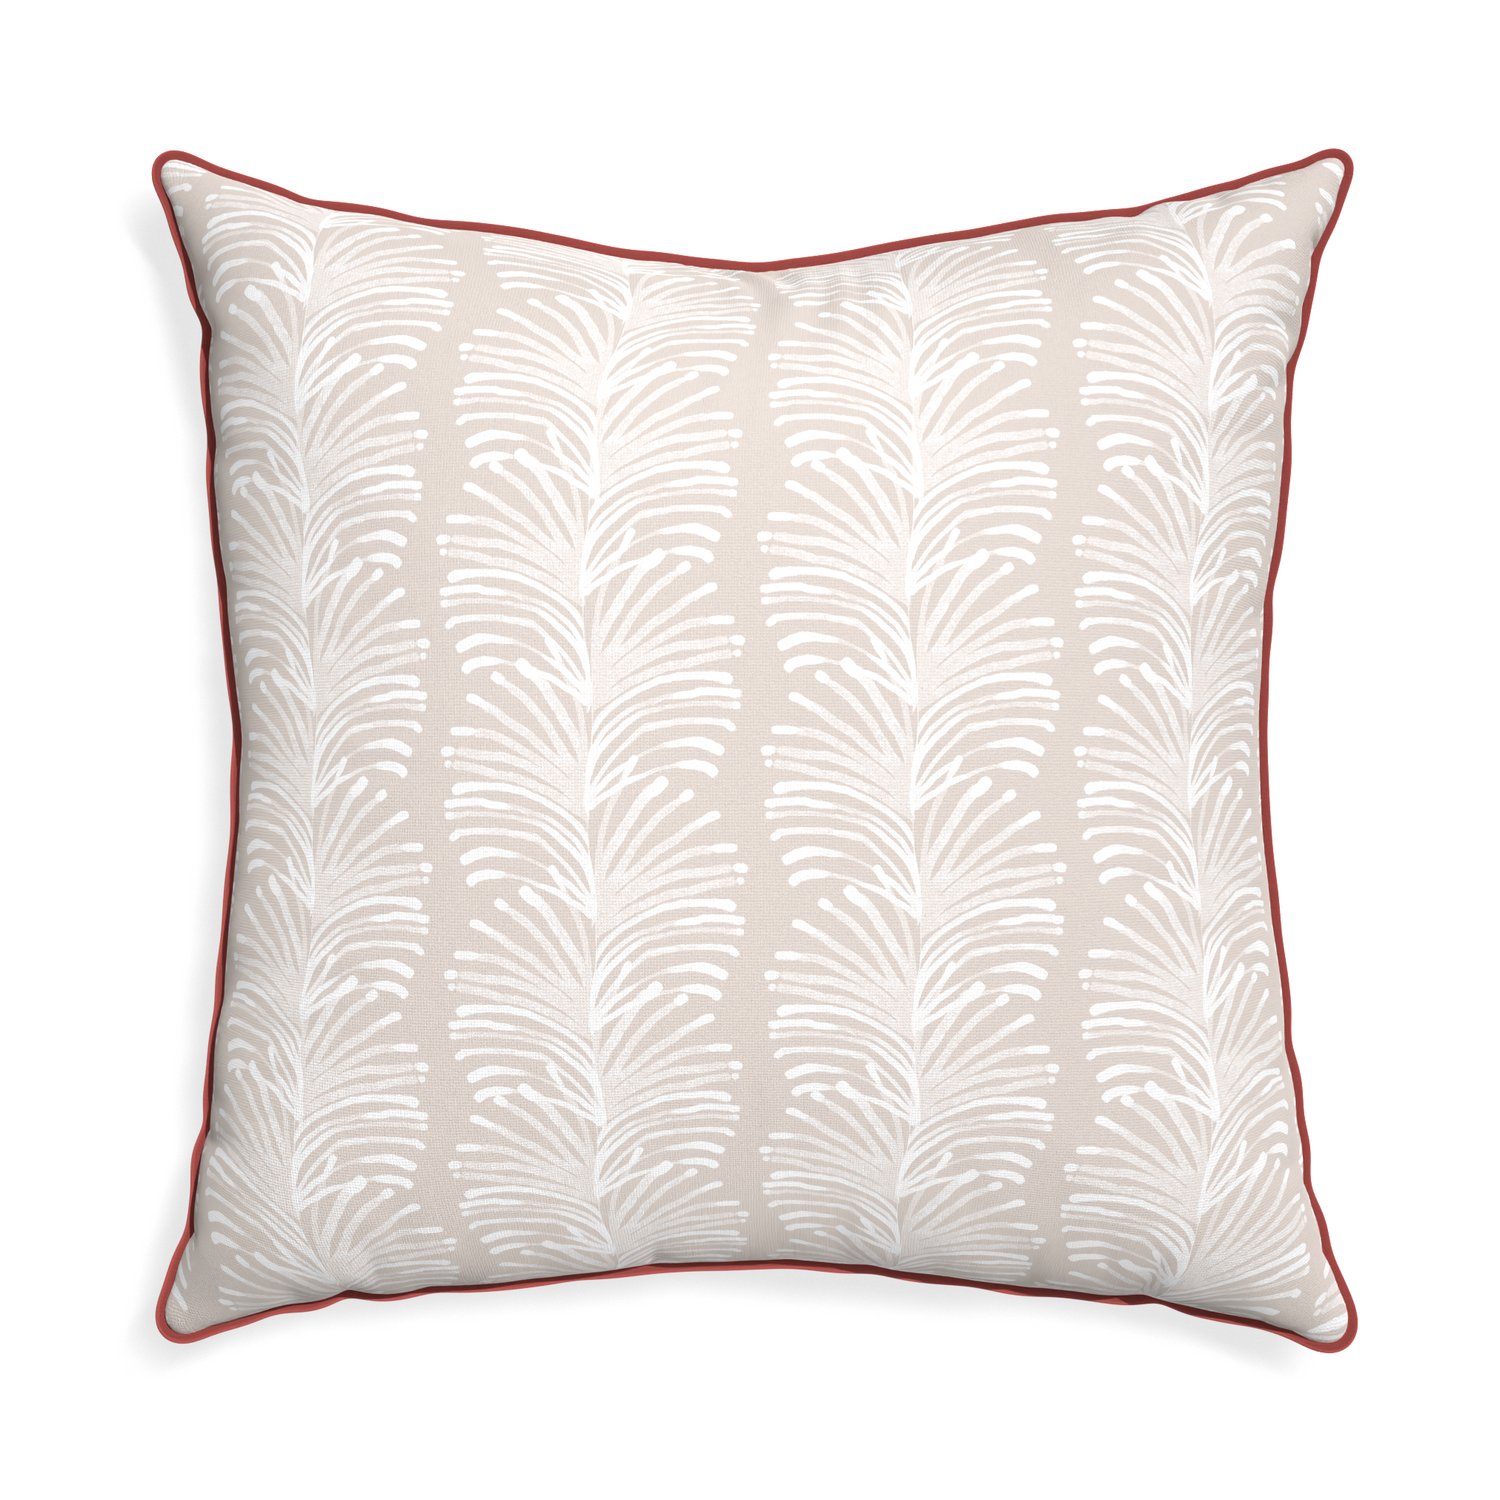 Euro-sham emma sand custom pillow with c piping on white background